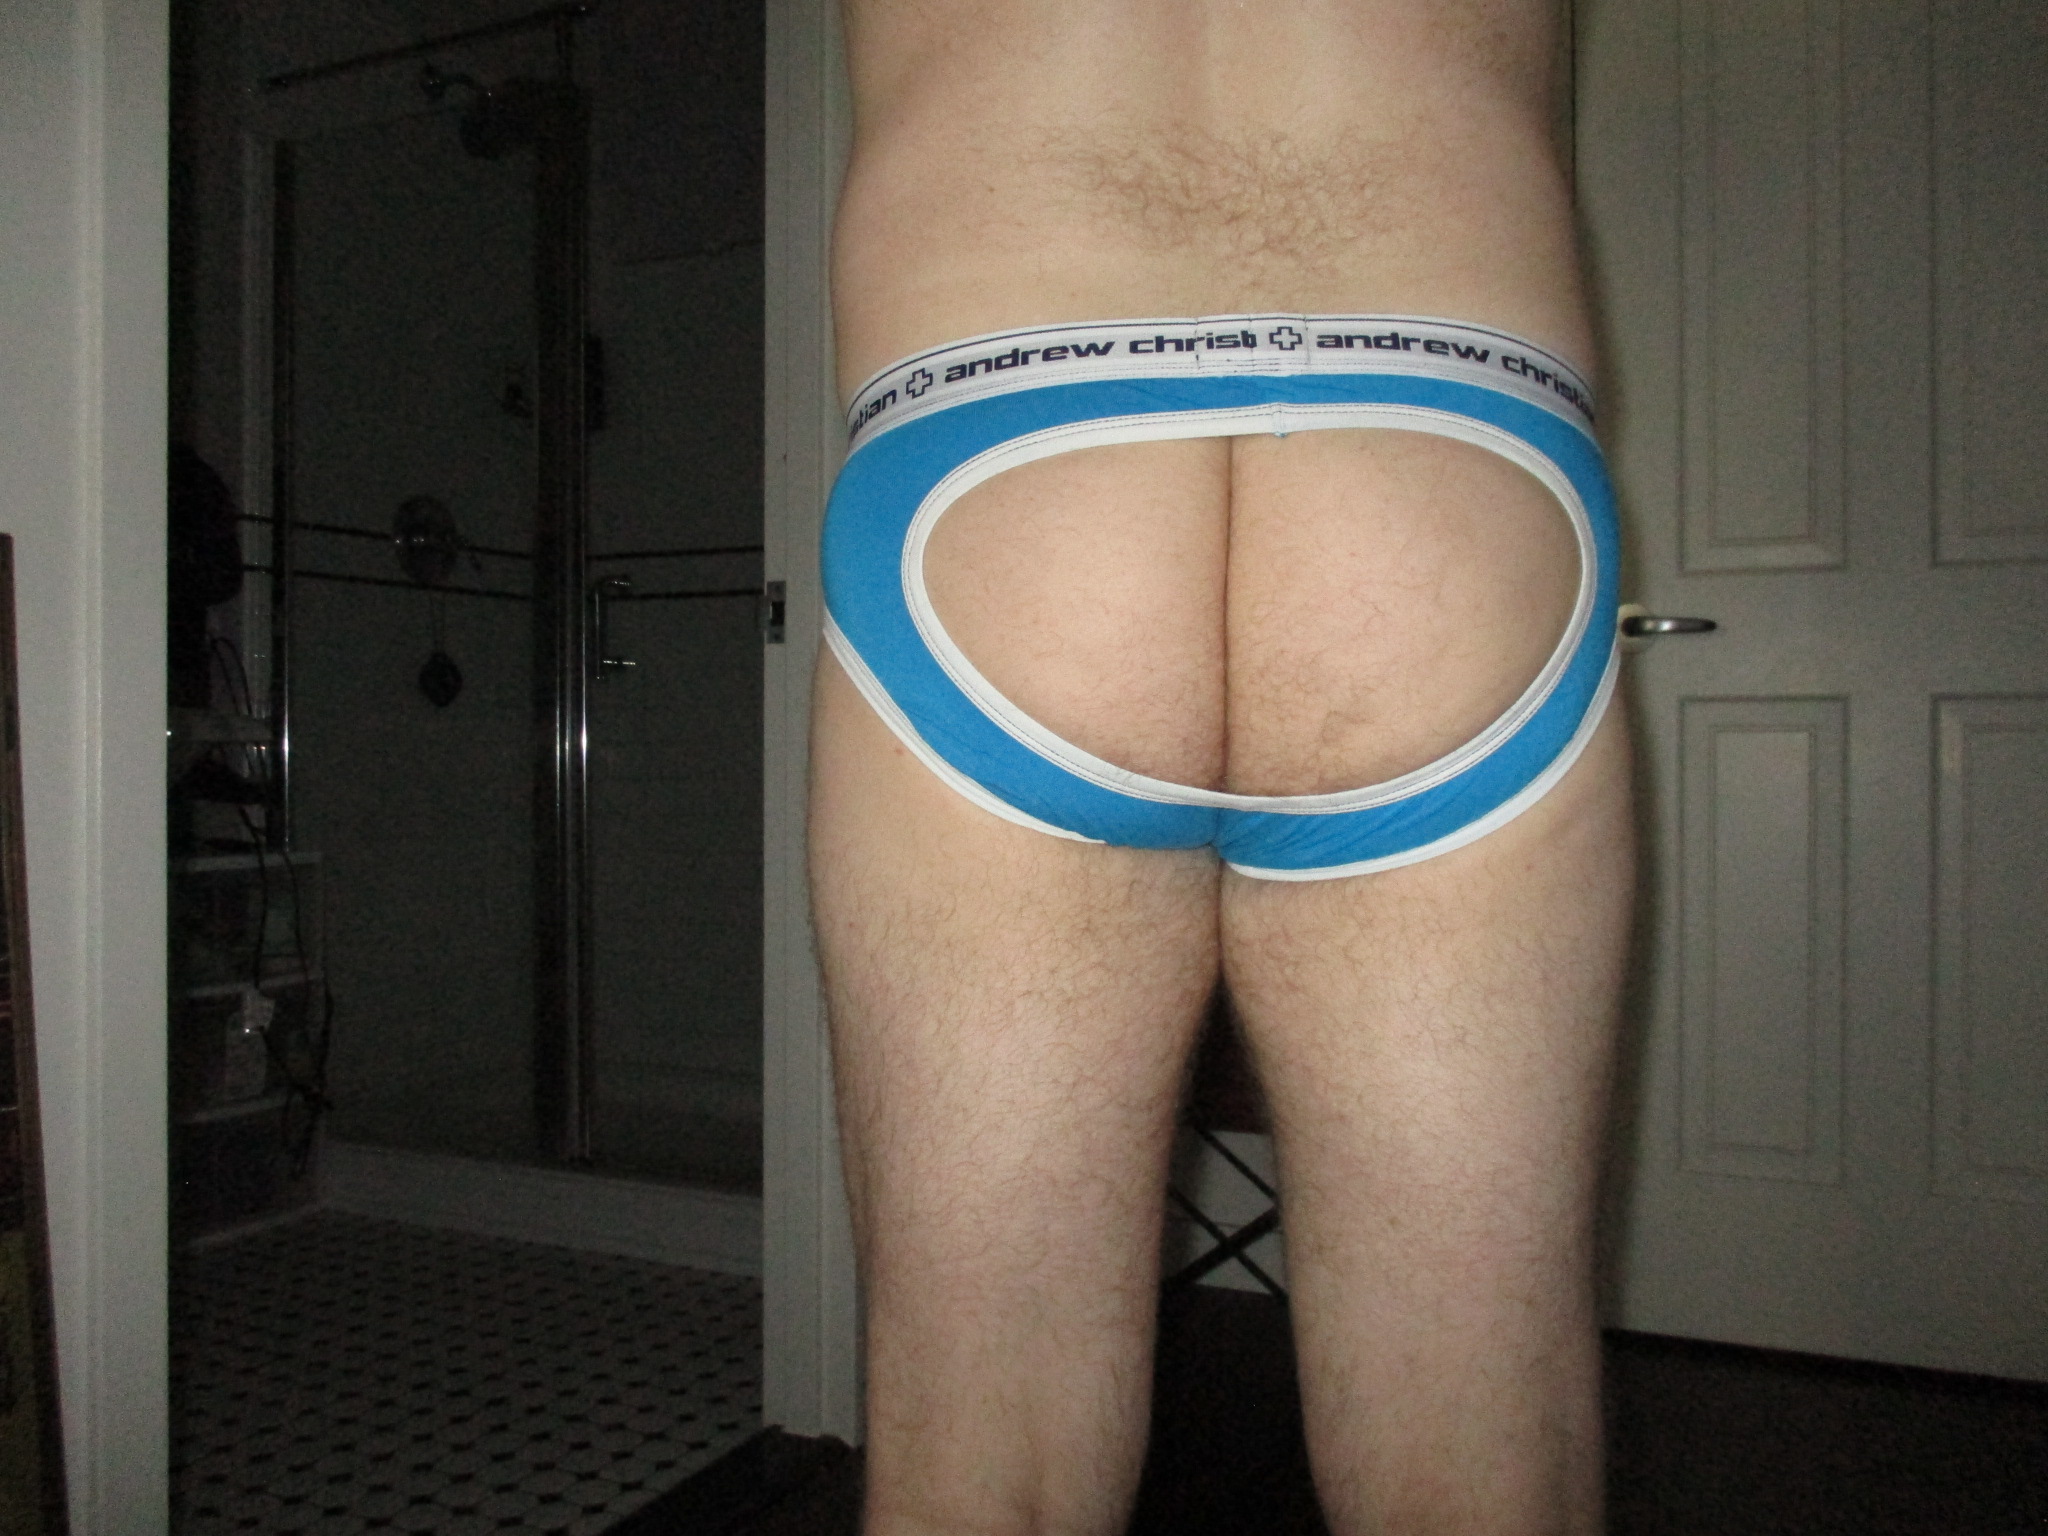 Bubble butts, air jocks and underwear, oh my!